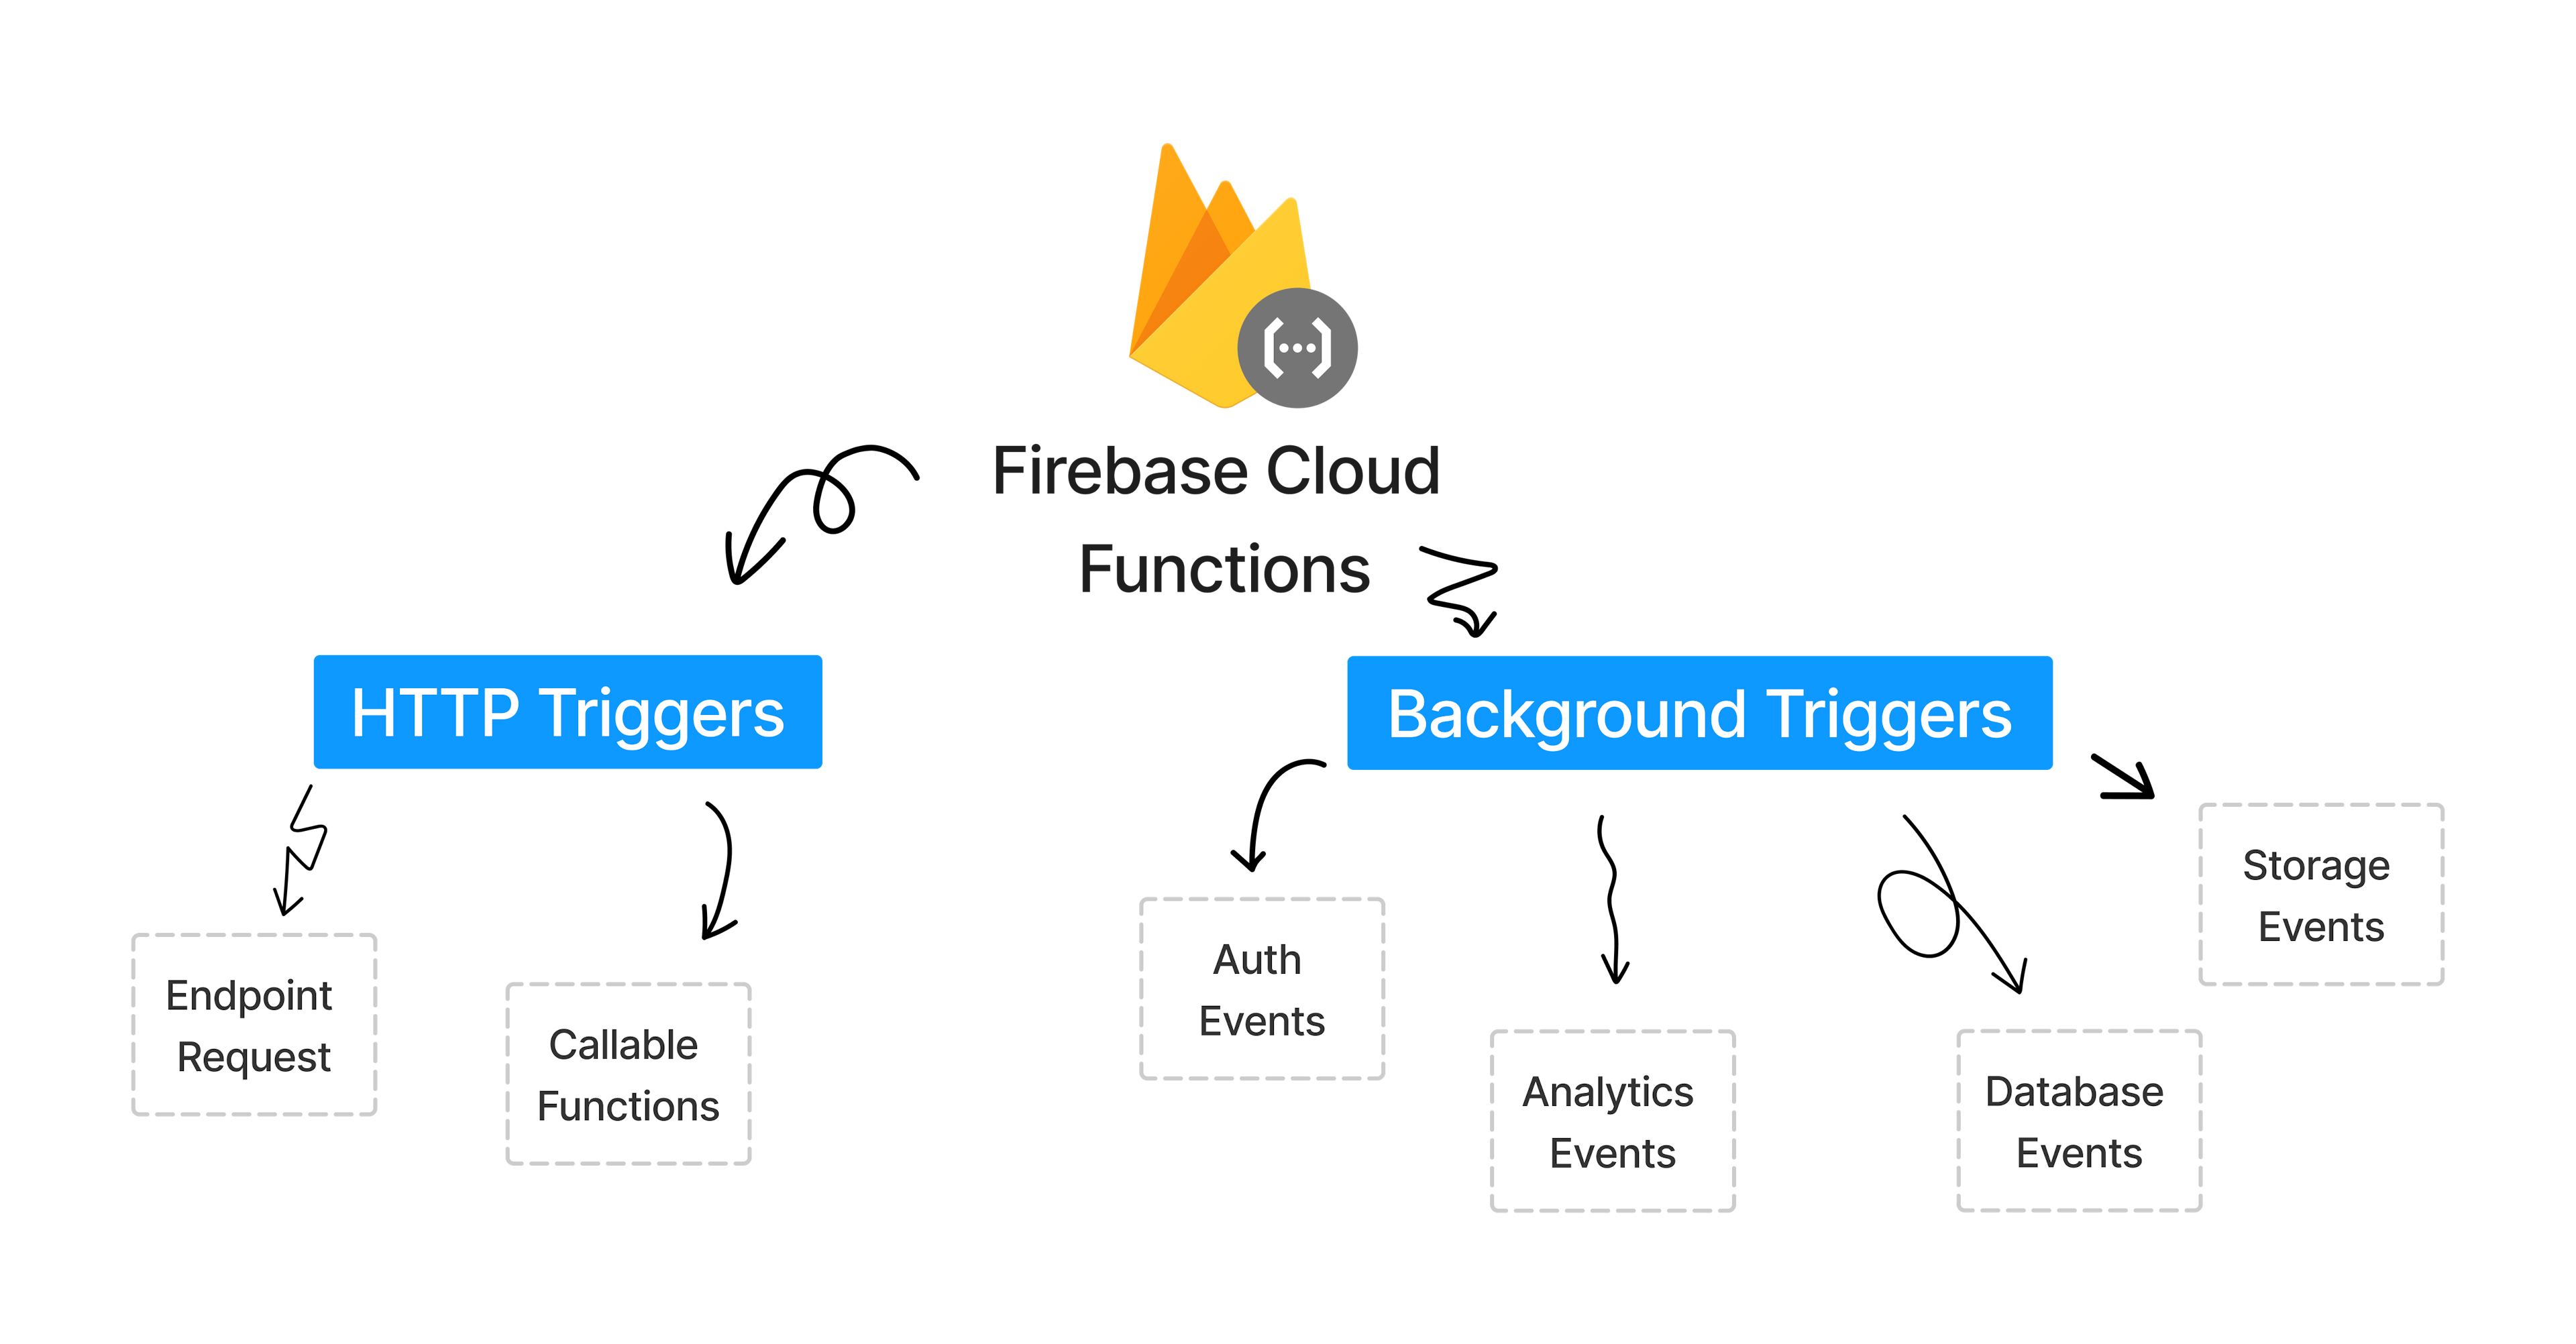 The image shows methods for calling firebase functions